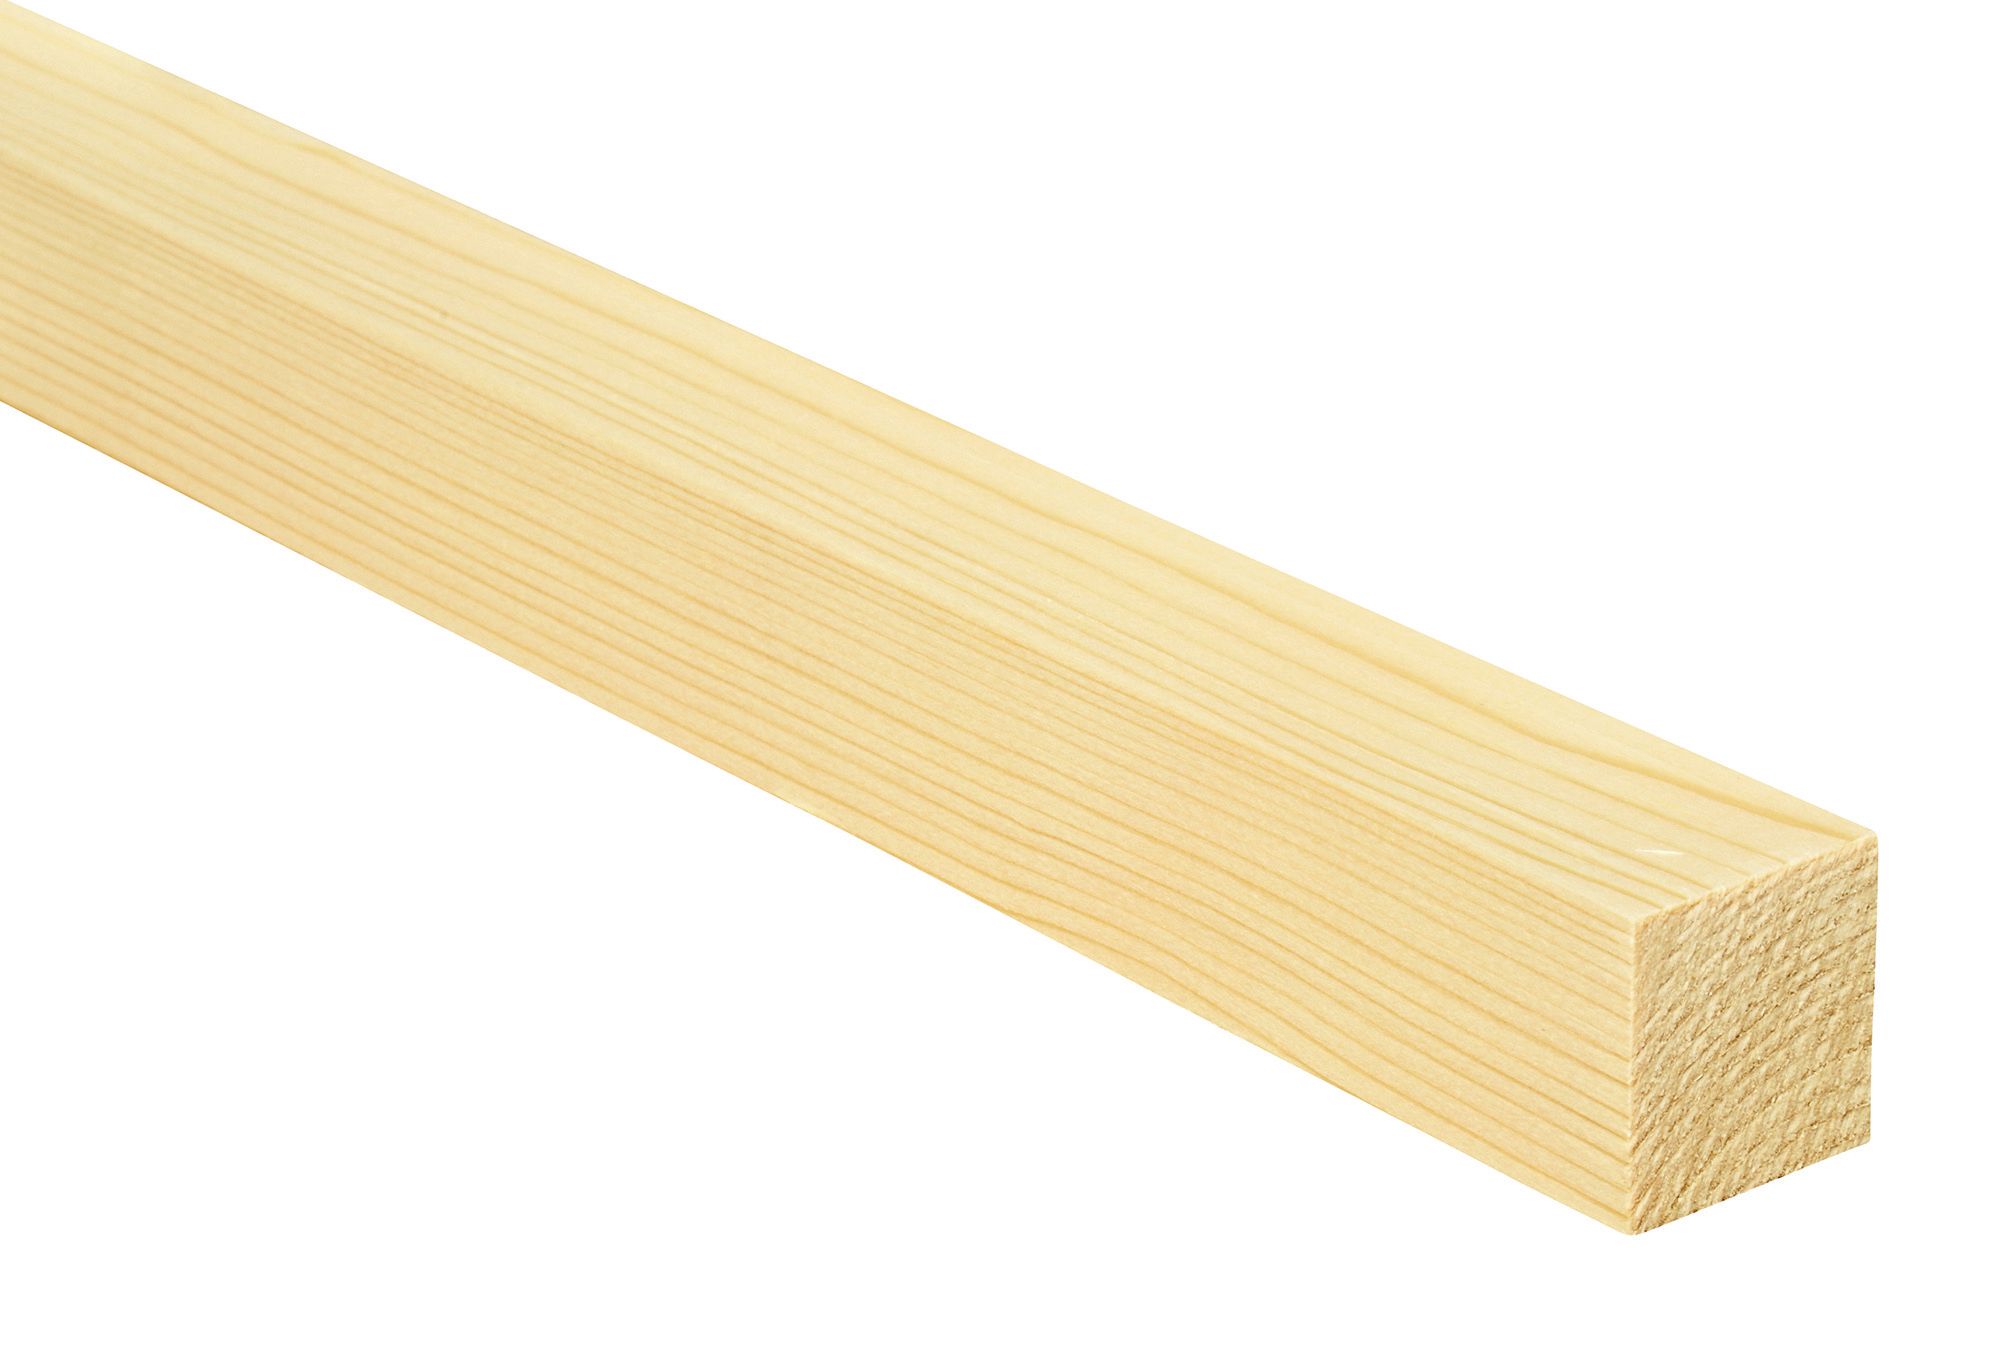 Image of Wickes Whitewood PSE Timber - 34mm x 34mm x 2400mm